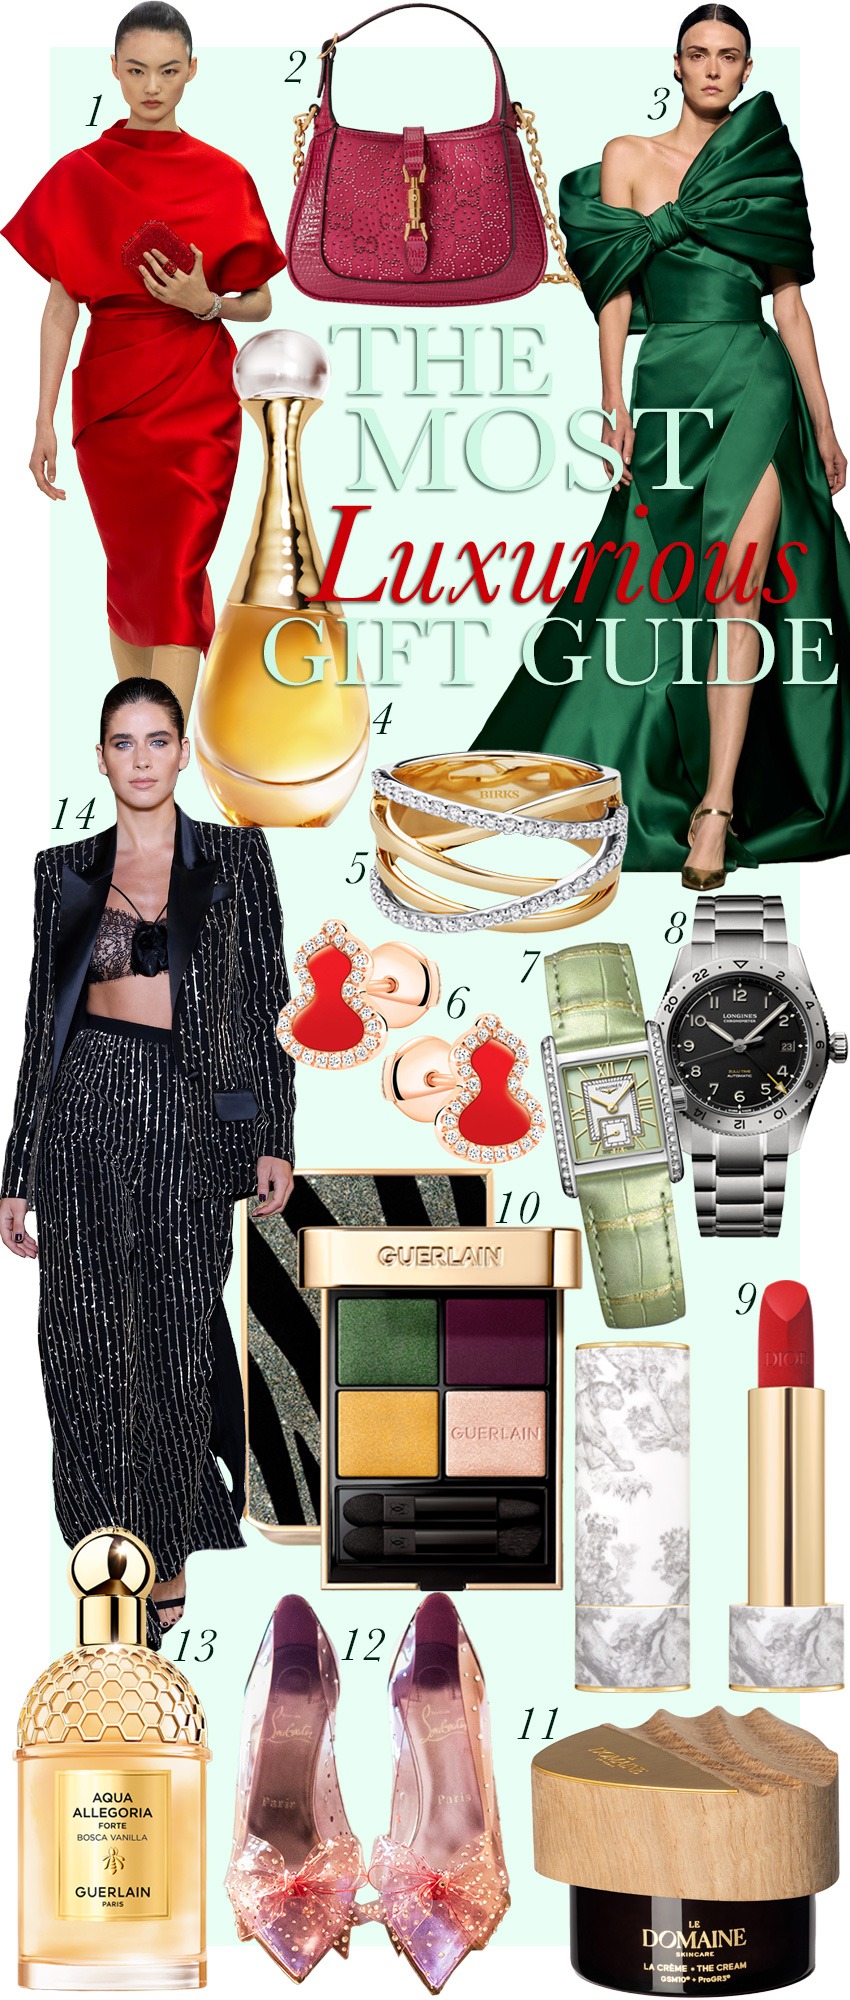 The Most Luxurious Gift Guide